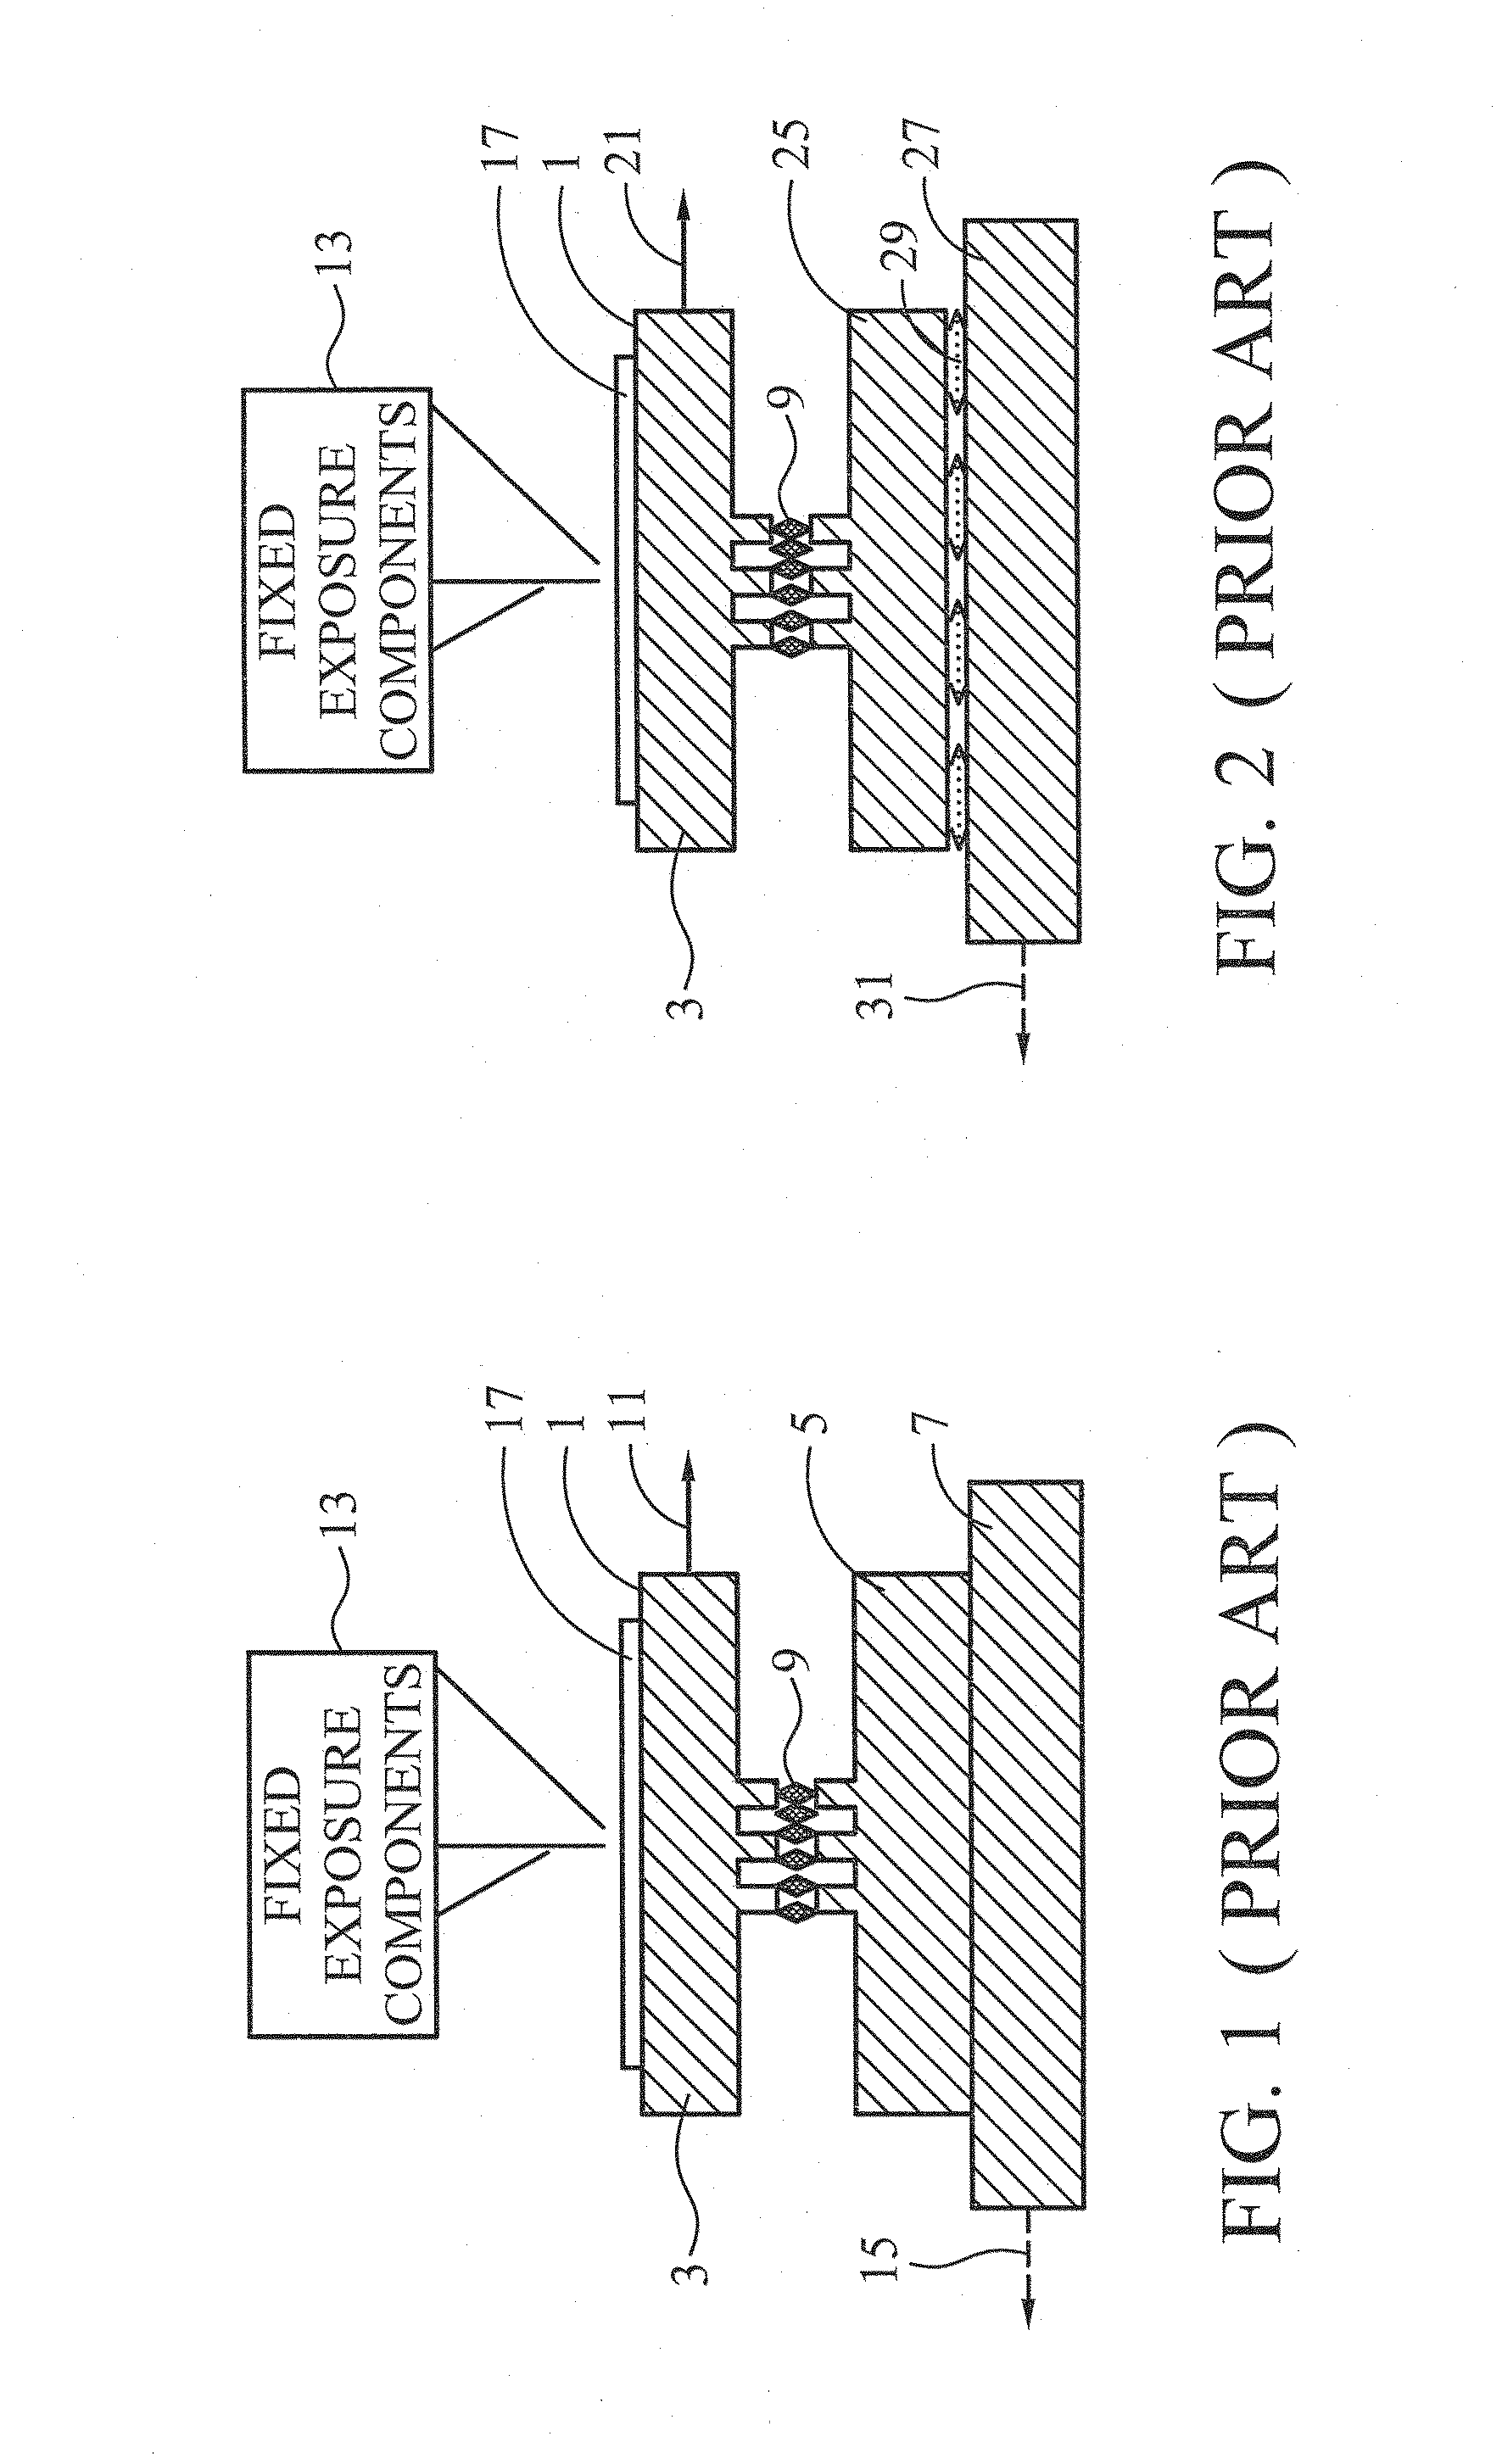 Semiconductor processing apparatus with simultaneously movable stages